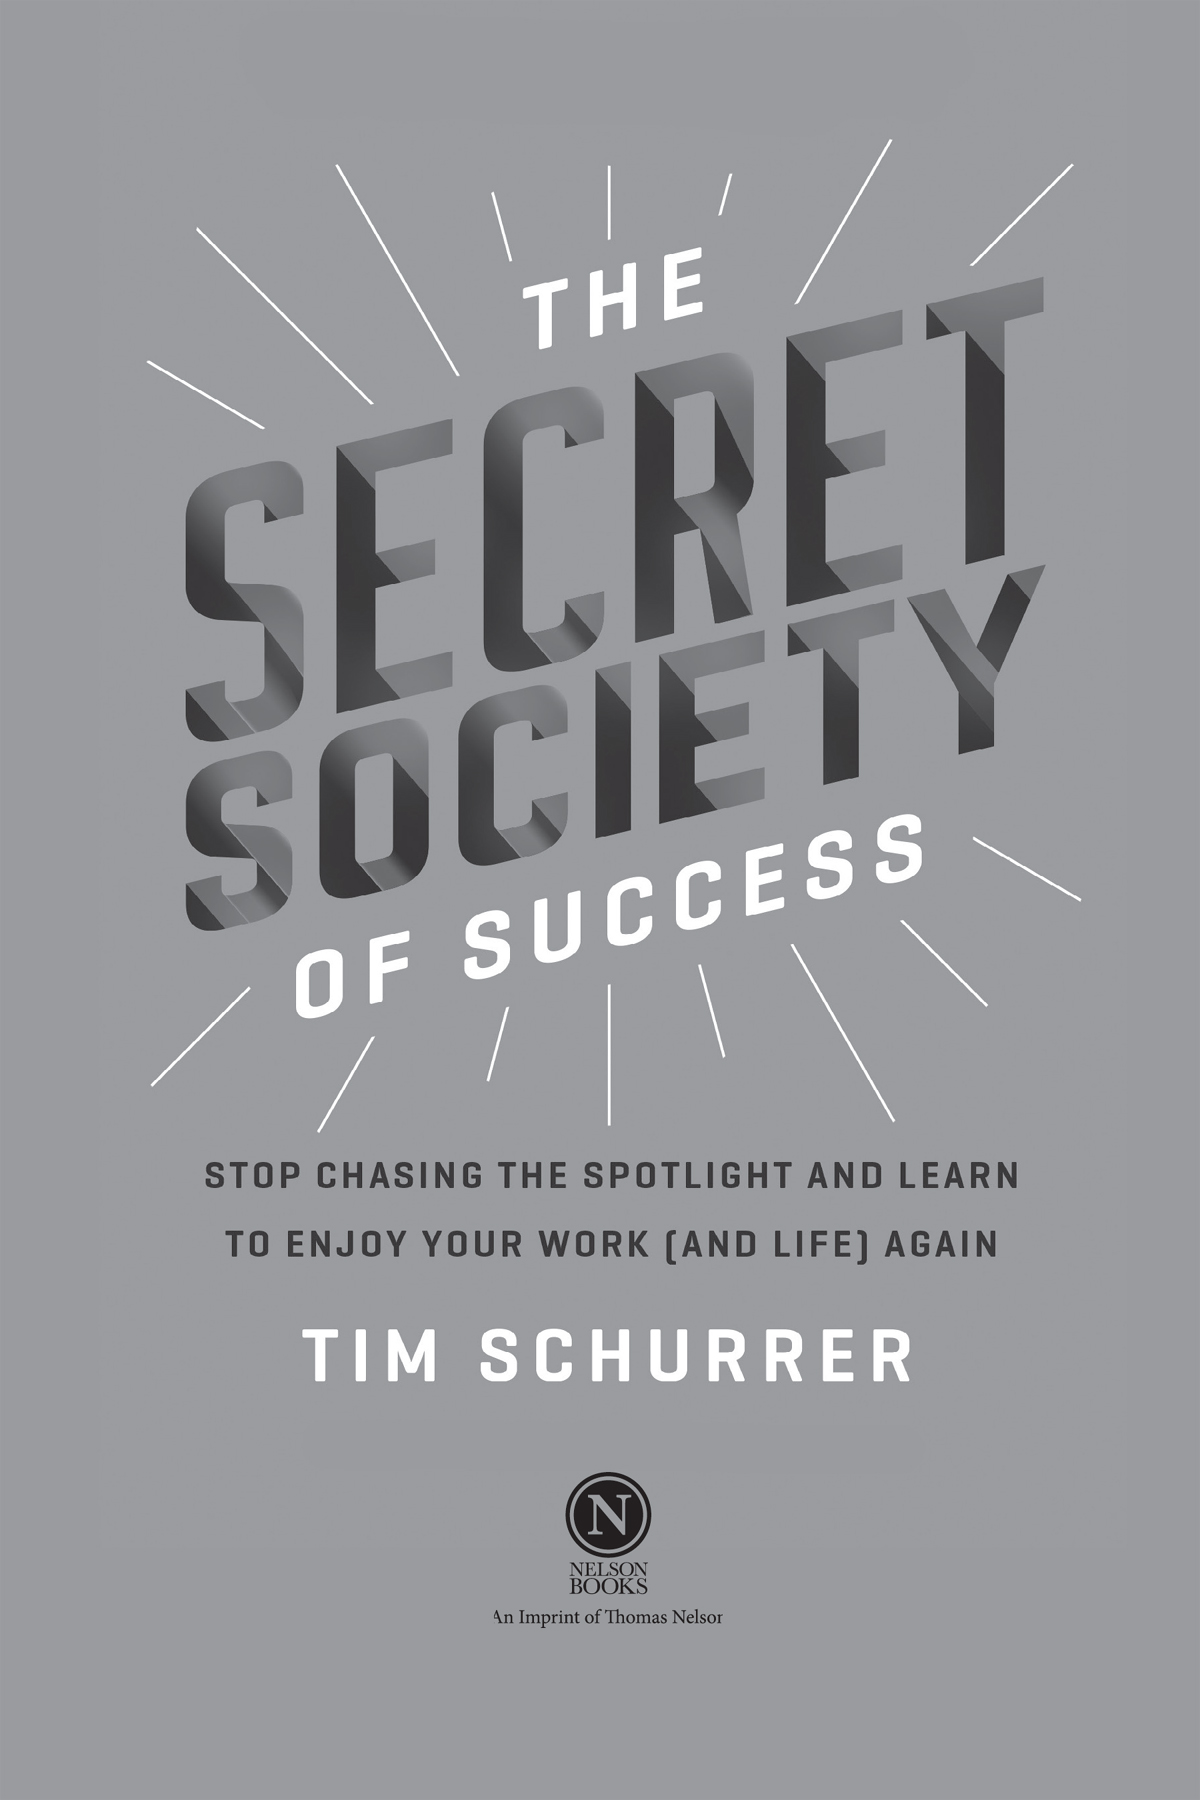 The Secret Society of Success 2022 Tim Schurrer All rights reserved No - photo 2